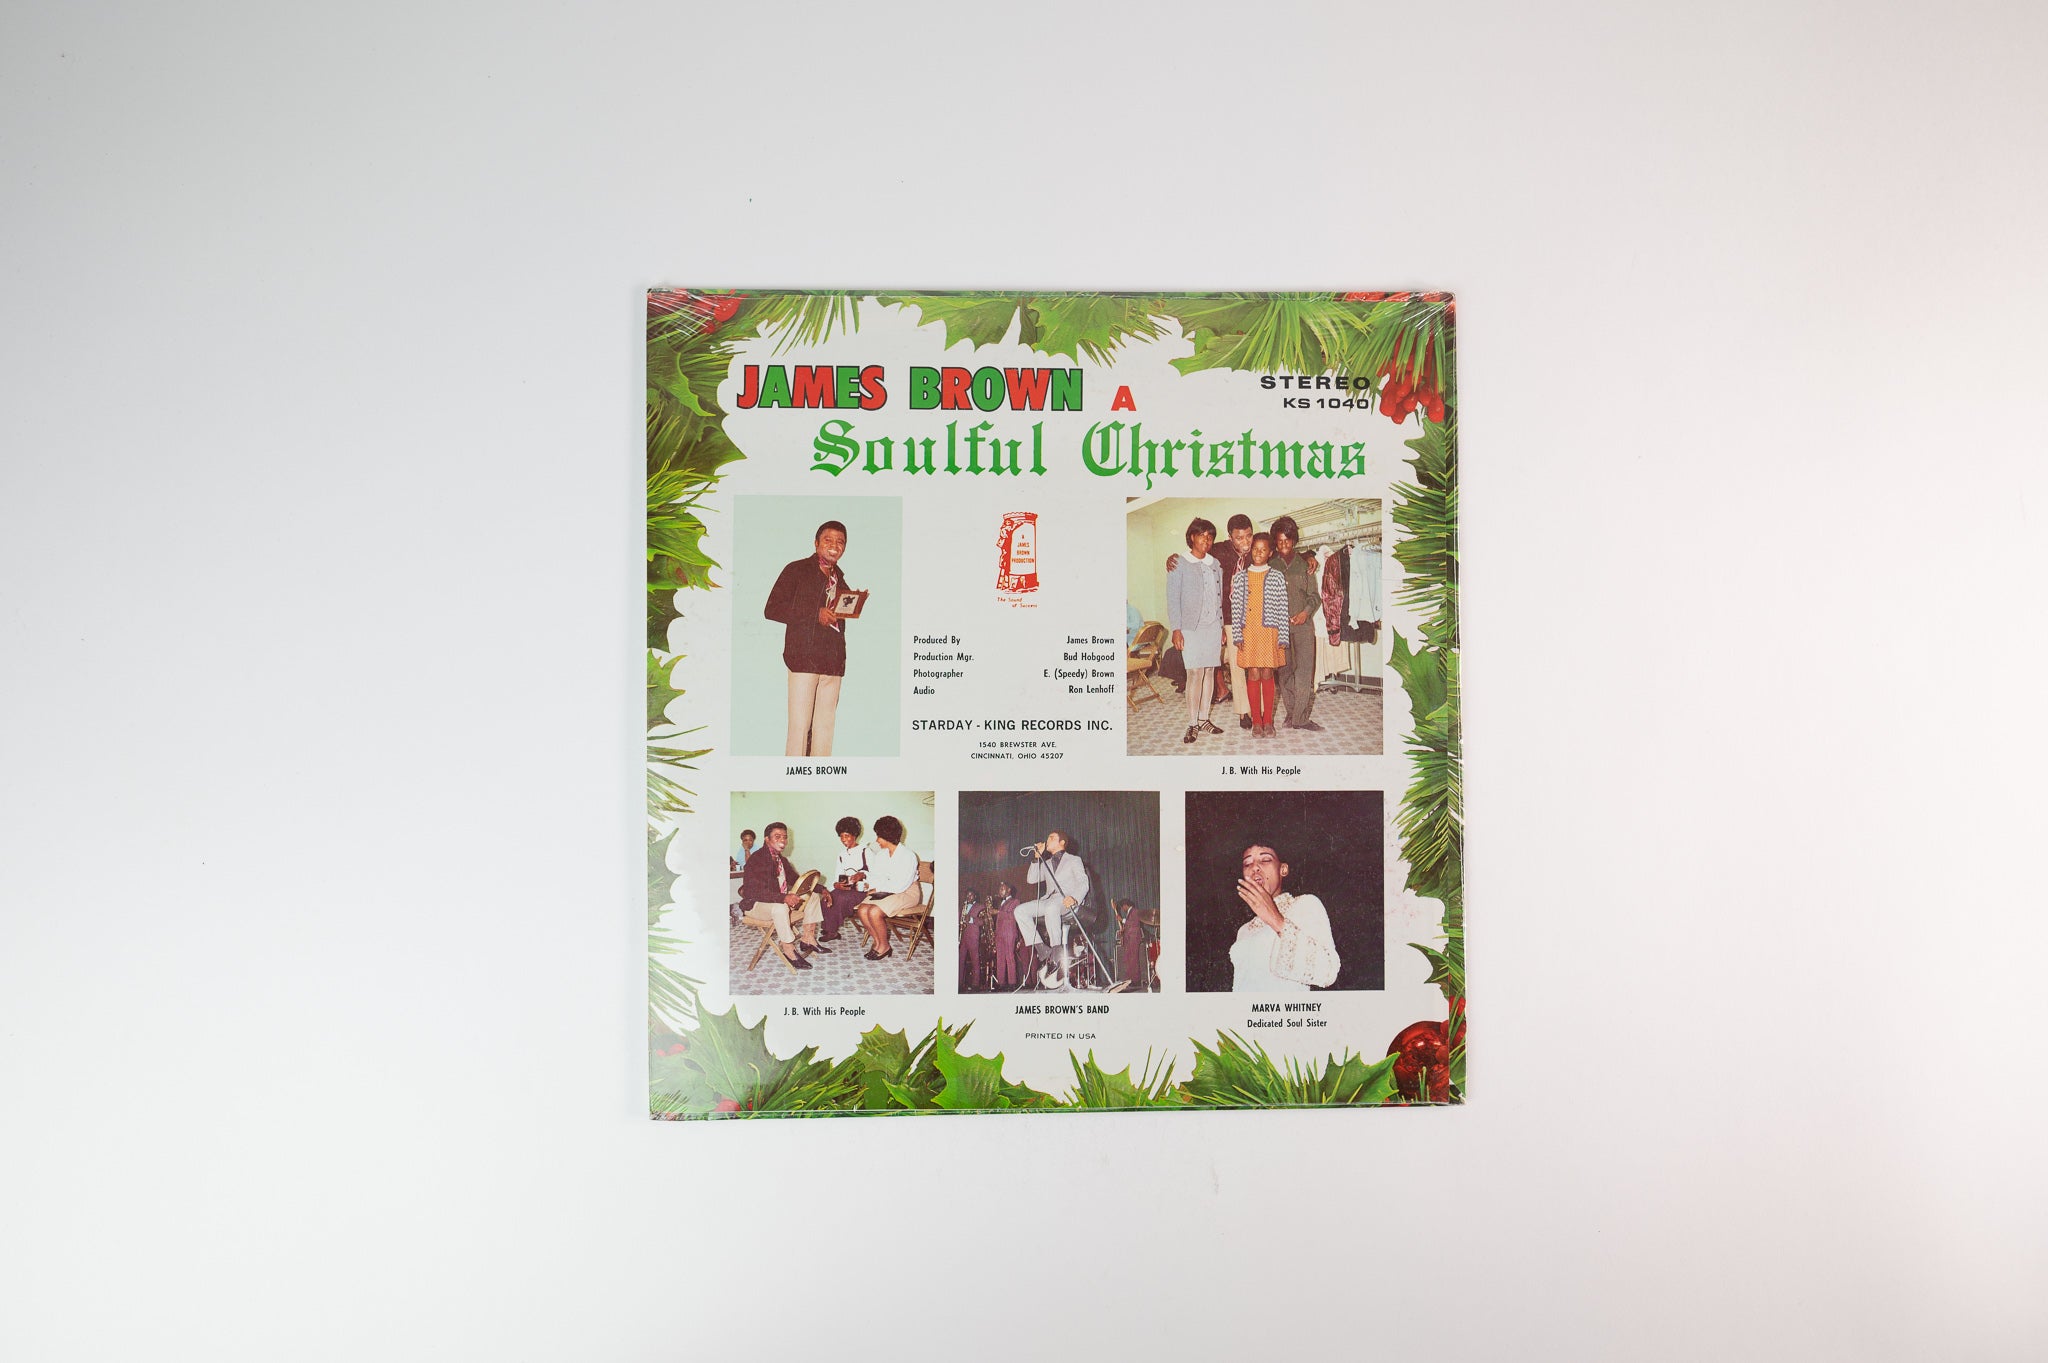 James Brown - A Soulful Christmas on King Stereo Sealed